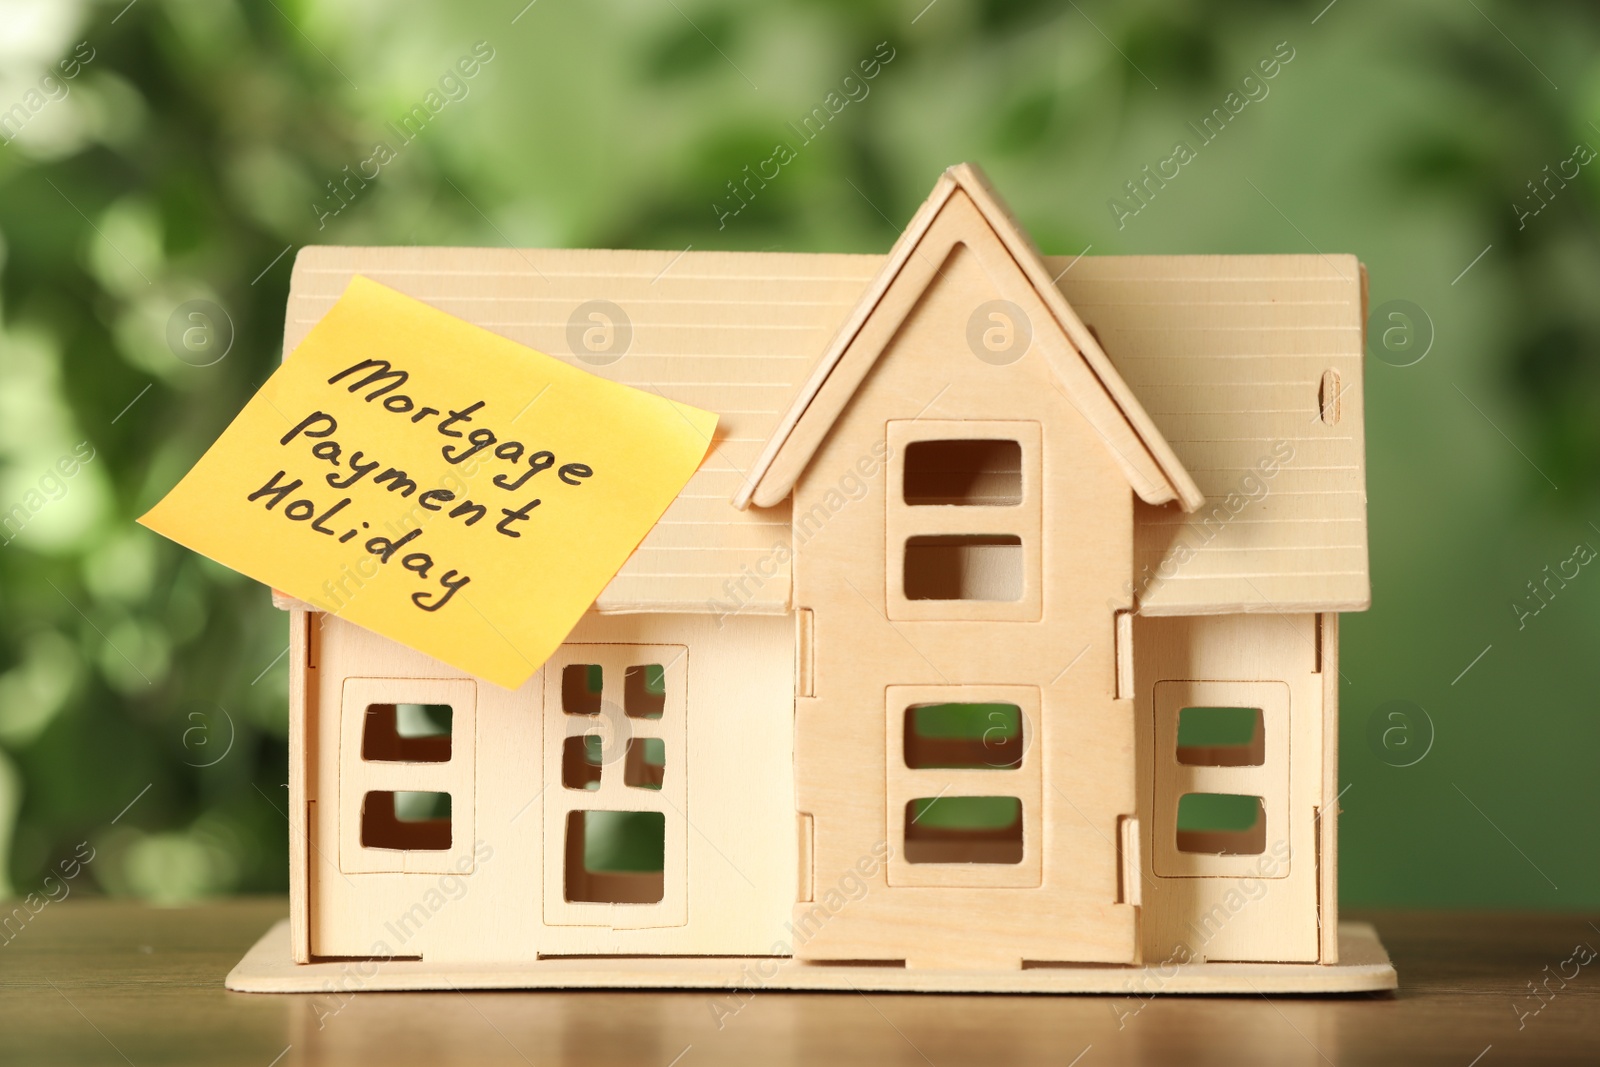 Photo of Paper note with words Mortgage Payment Holiday and house model on wooden table against blurred background